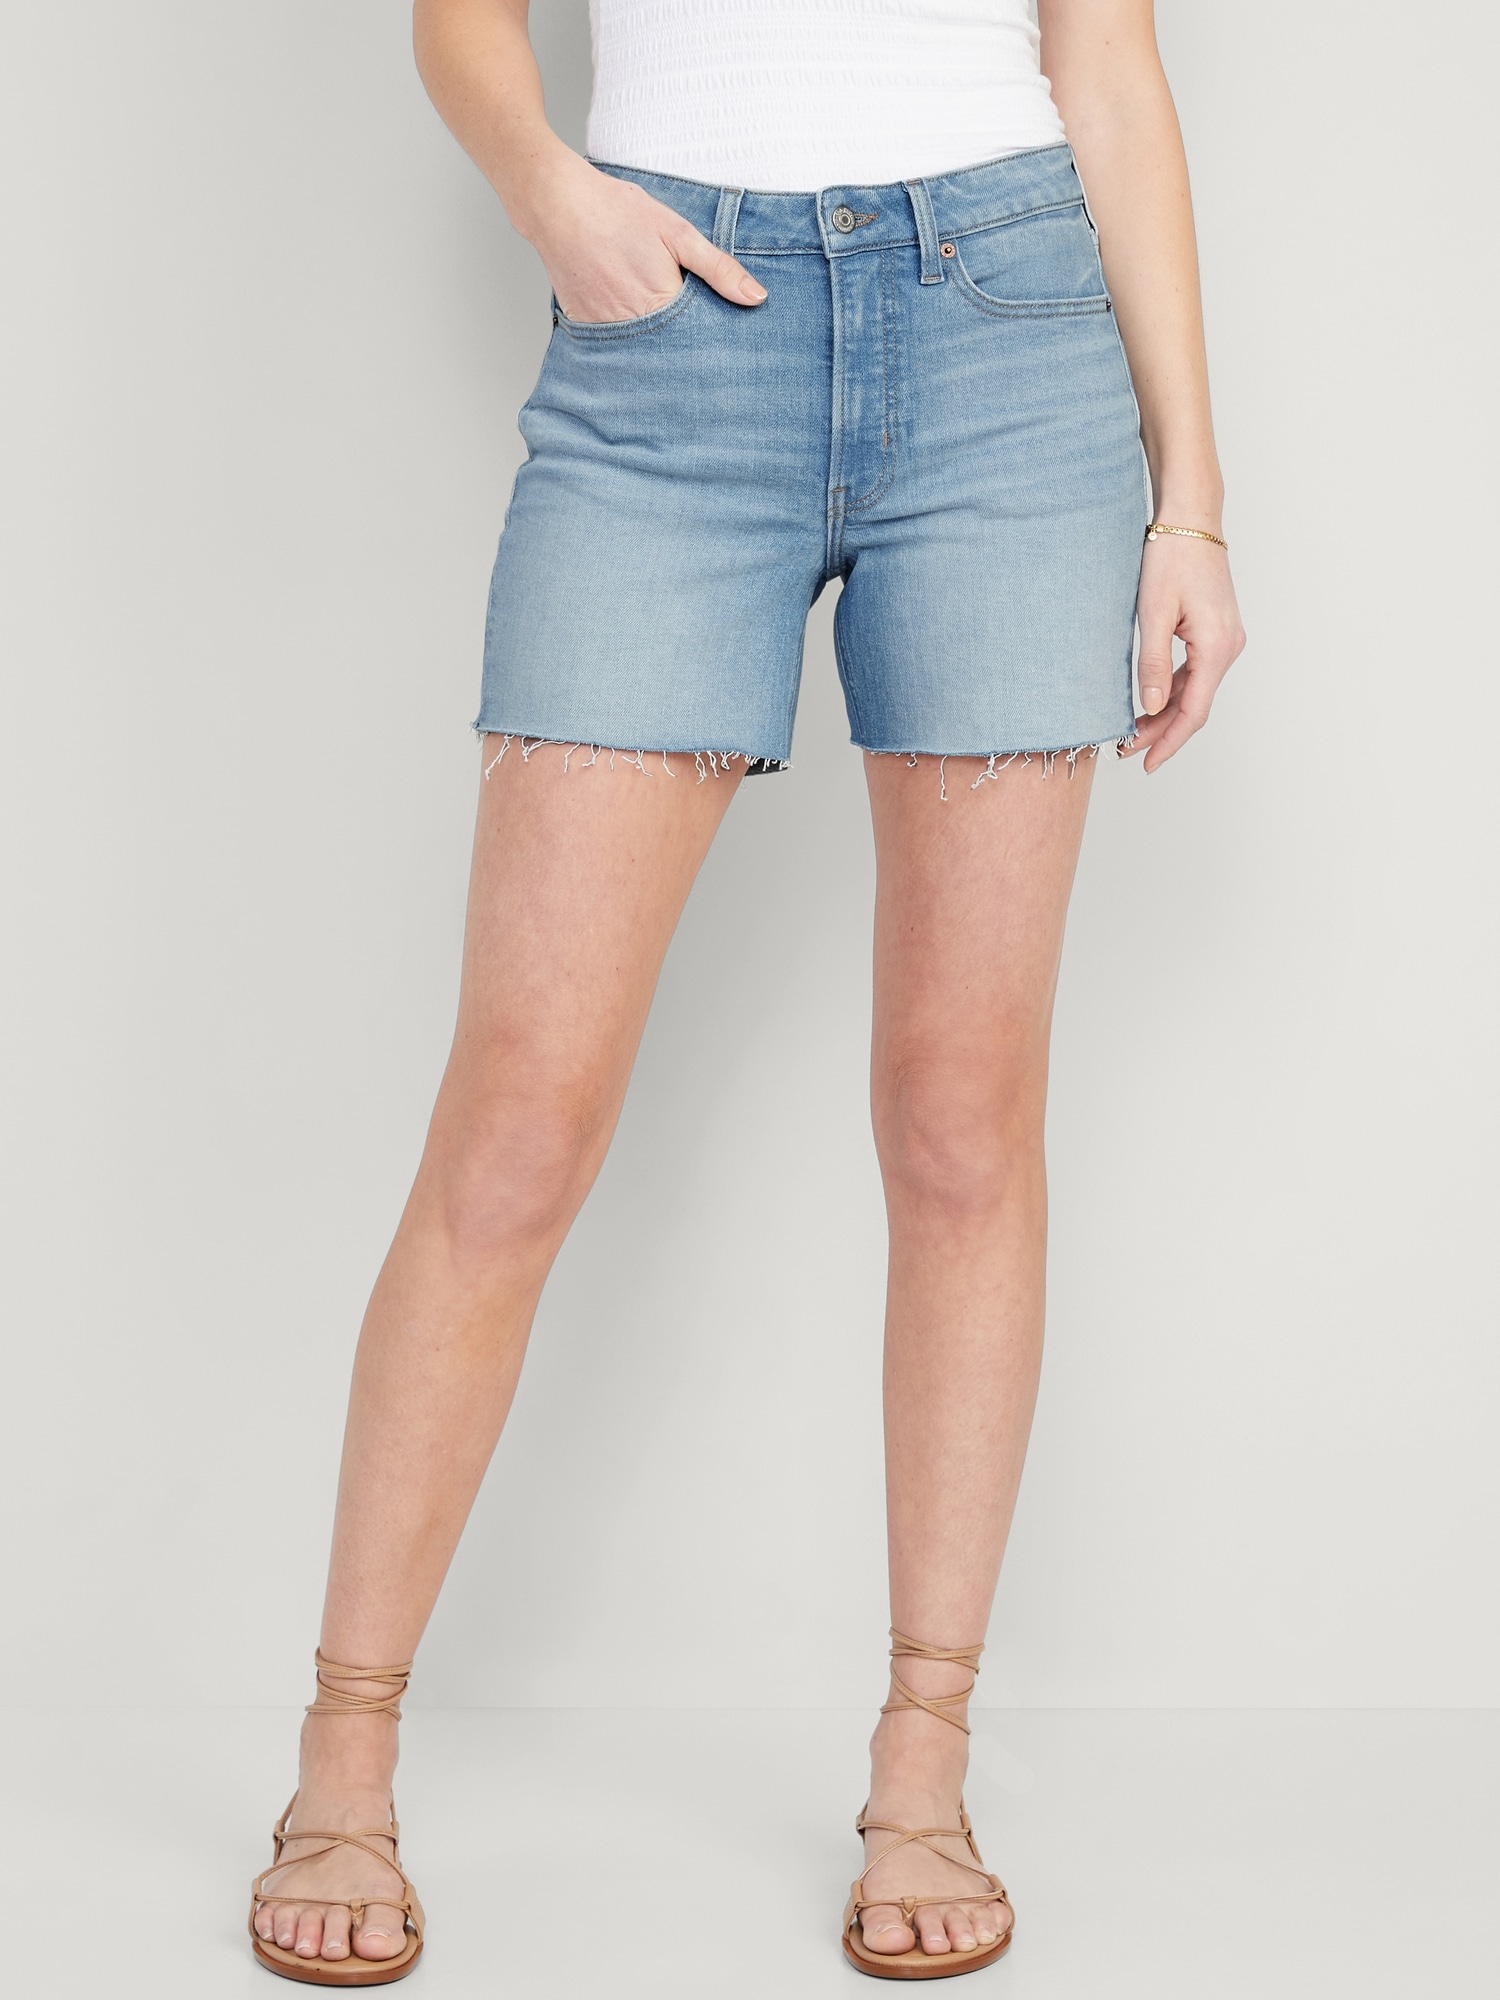 High-Waisted OG Straight Cut-Off Jean Shorts -- 5-inch inseam